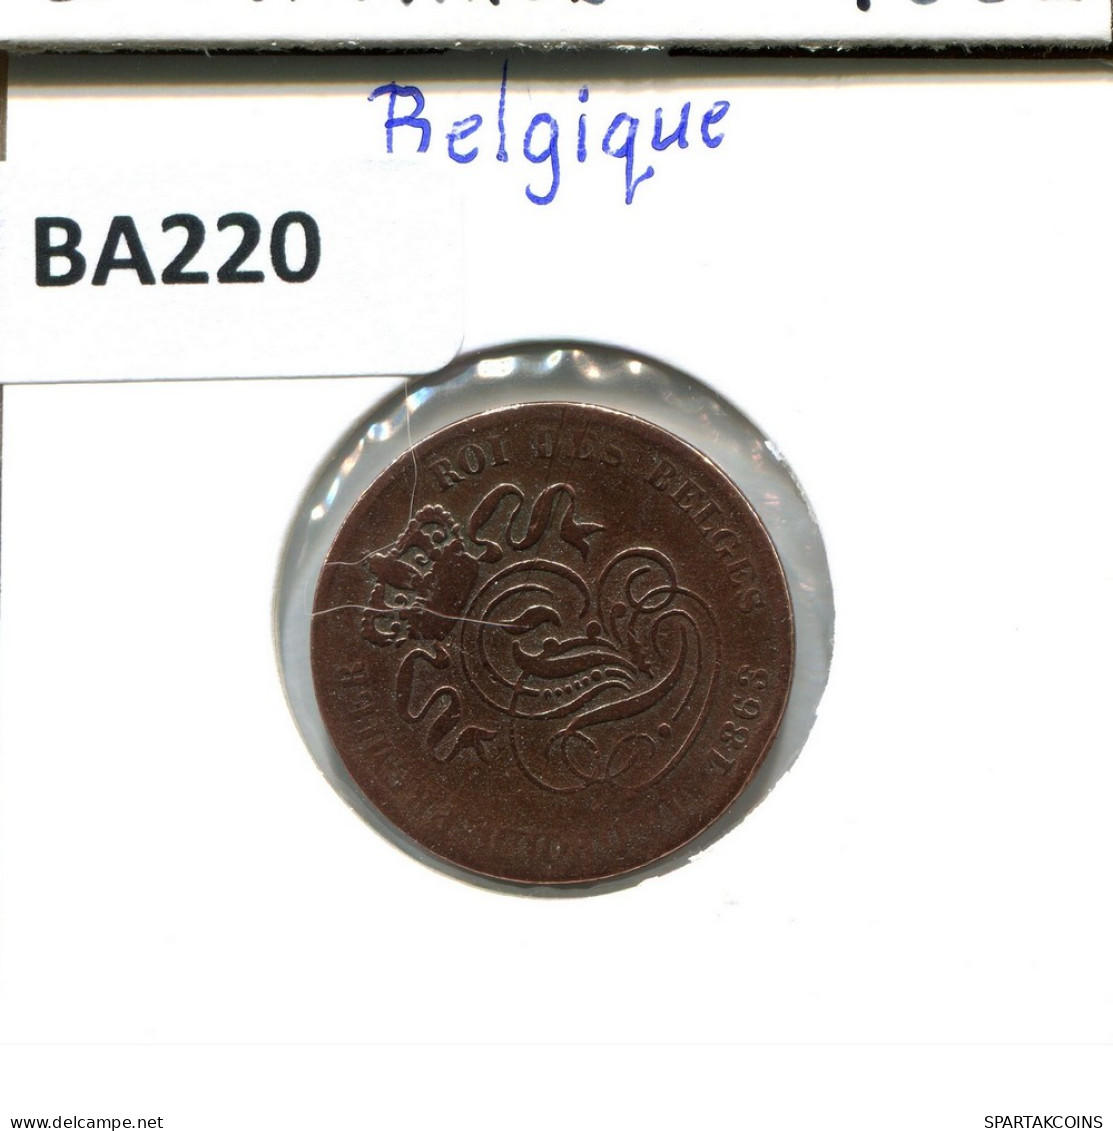 2 CENTIMES 1863 FRENCH Text BELGIUM Coin #BA220.U - 2 Cents